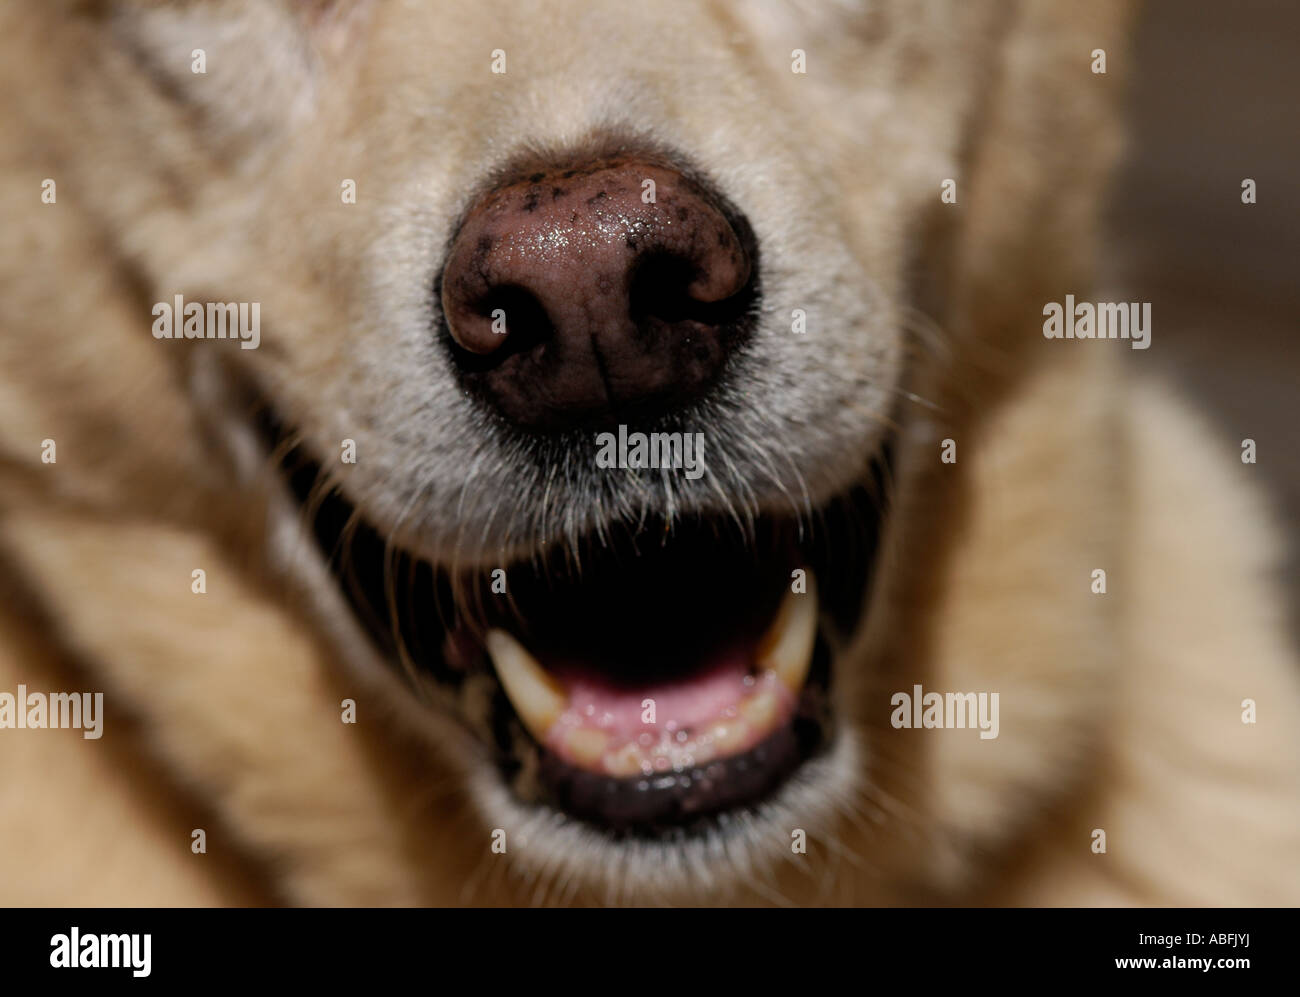 Dog's nose close up with open mouth panting and canine teeth Stock Photo